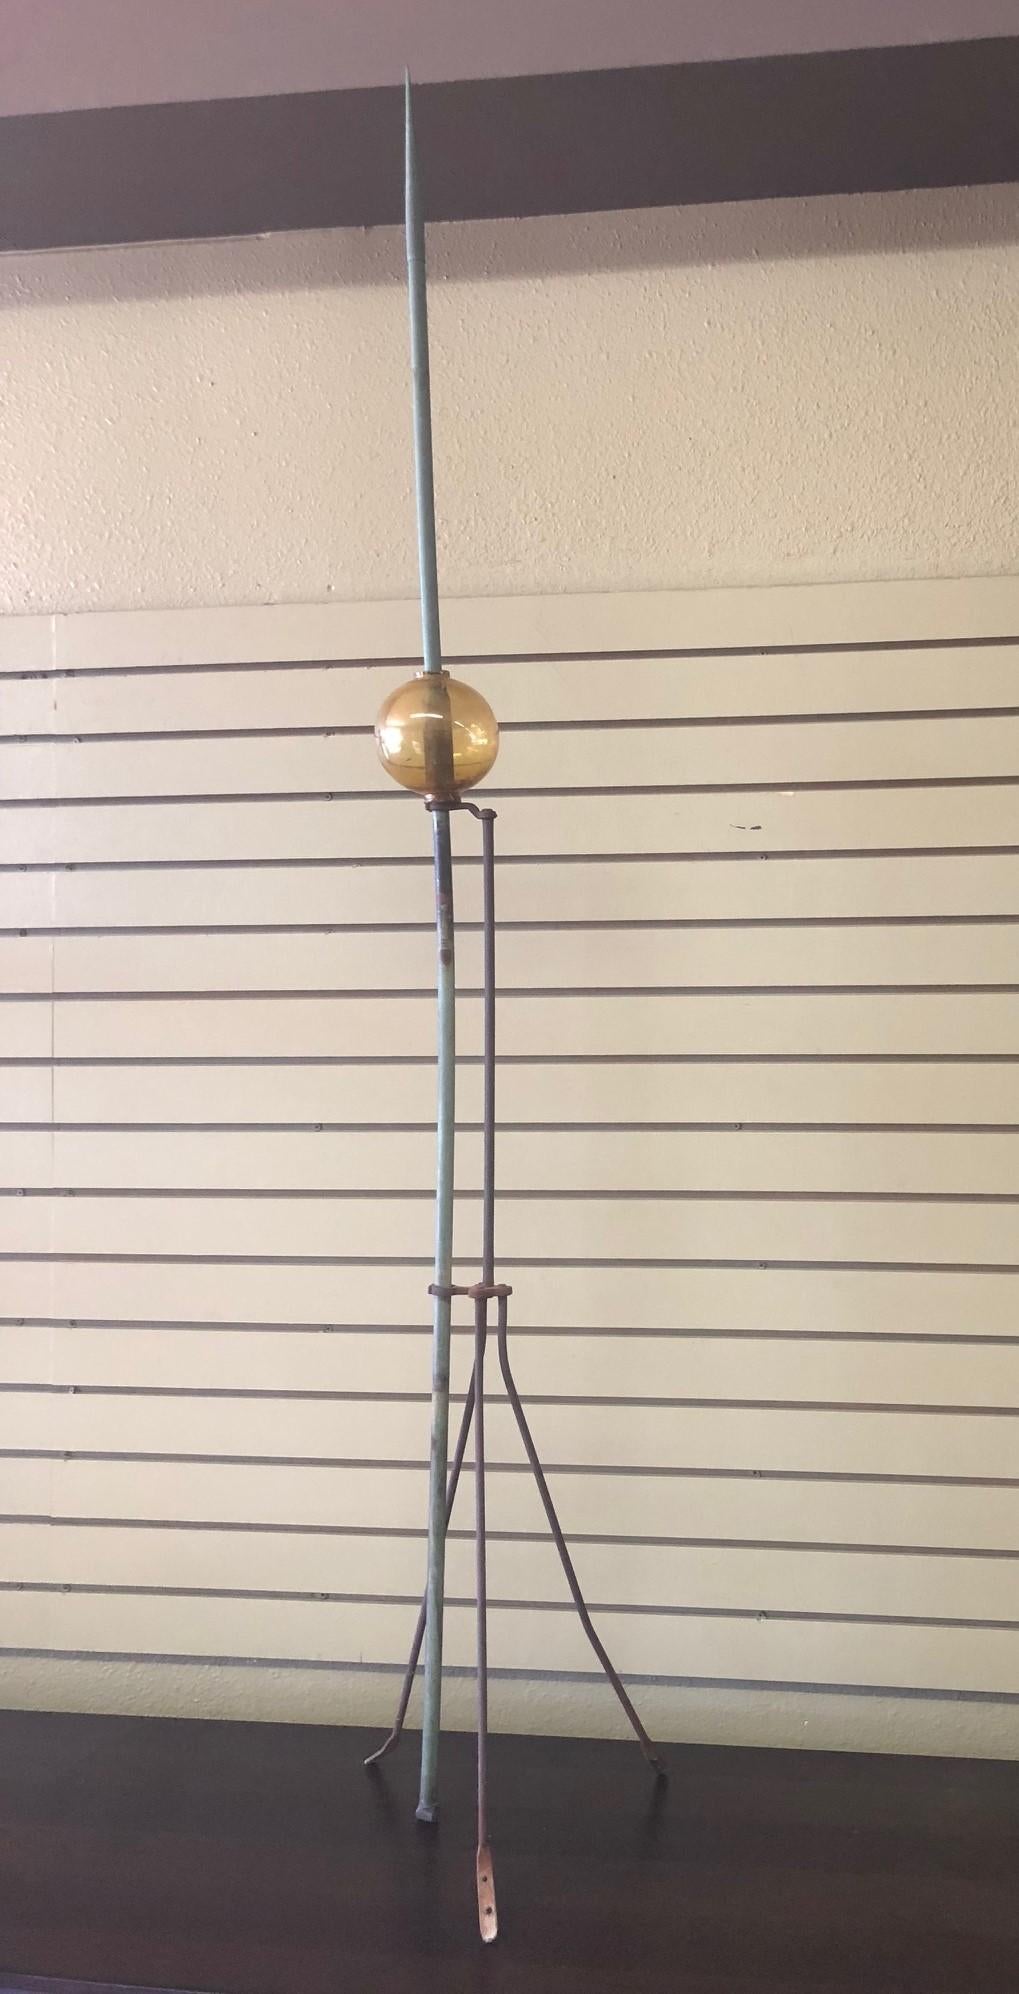 A very nice Victorian lightning rod made of a wrought iron tripod base and a slender copper rod pole with original glass ball, circa 1920s. The piece is in good vintage condition with beautiful verdigris patina on the rod.